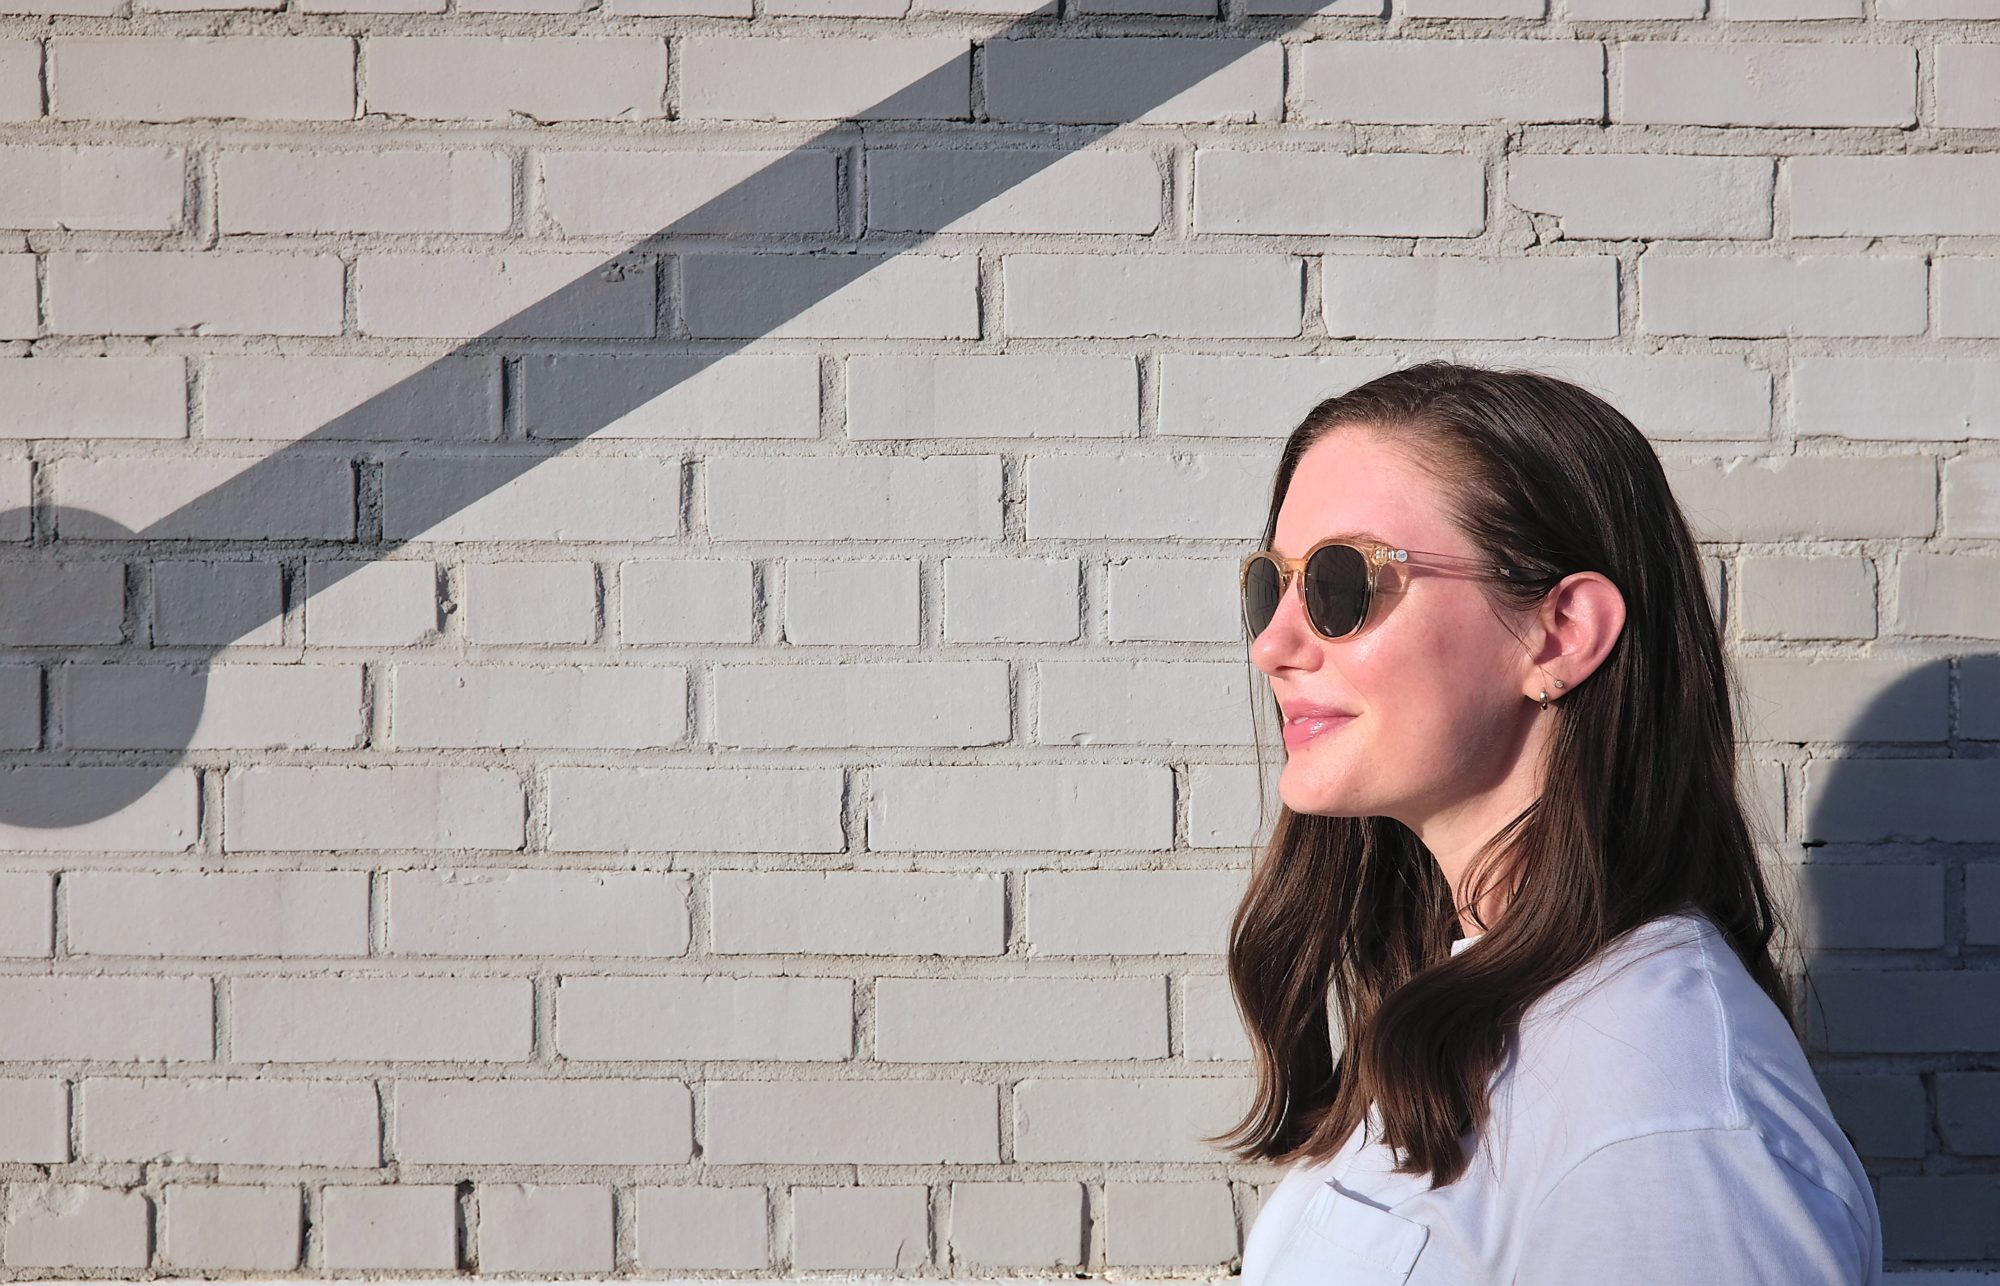 Alyssa wears the Yuba sunglasses in front of a tan brick wall and turns in profile